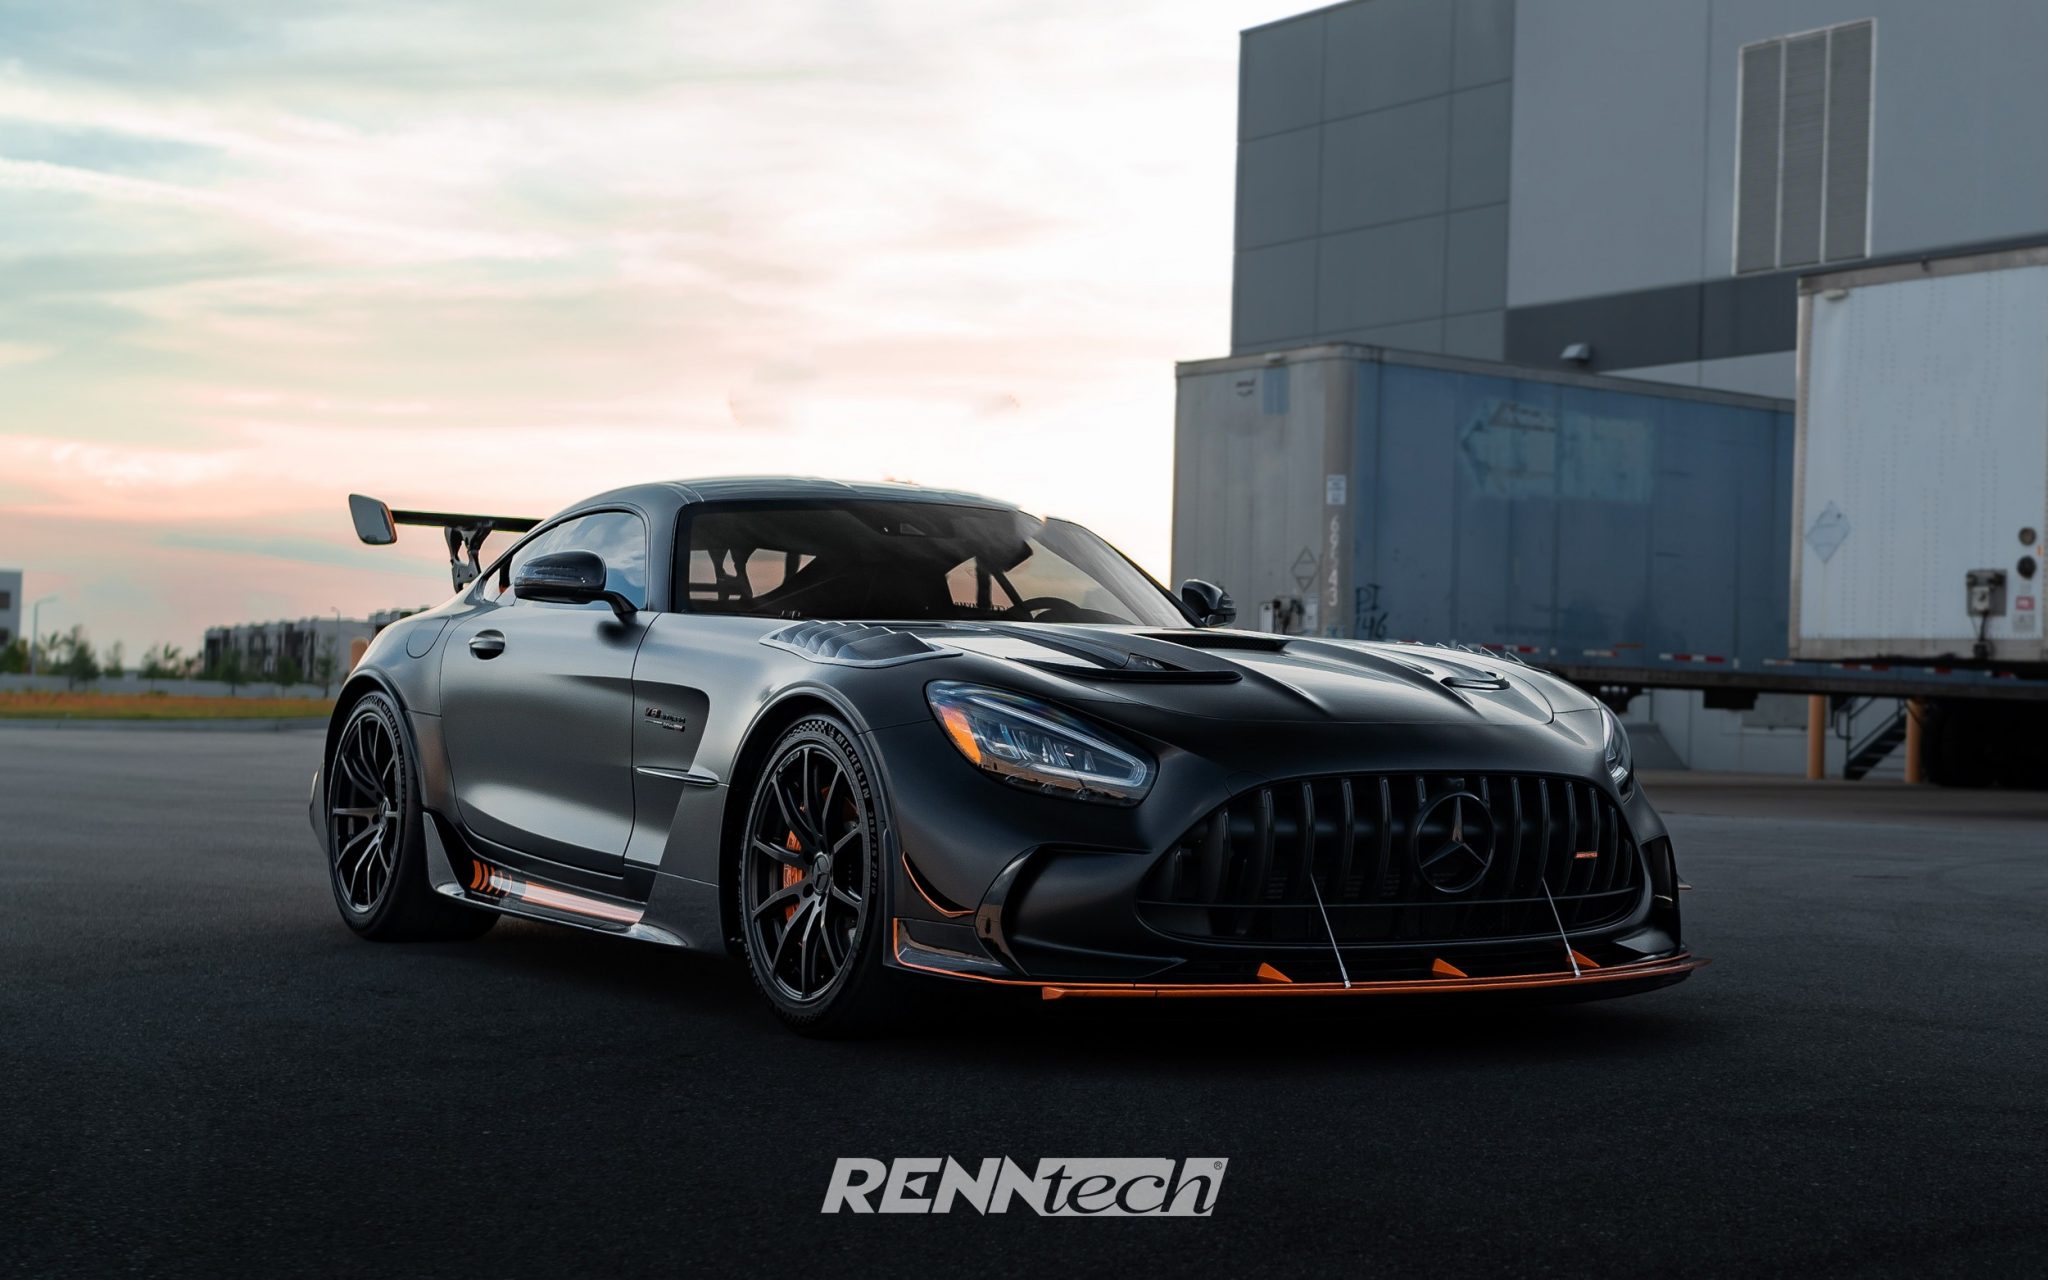 RENNtech Produces the World’s Most Powerful Mercedes-AMG GT Black Series